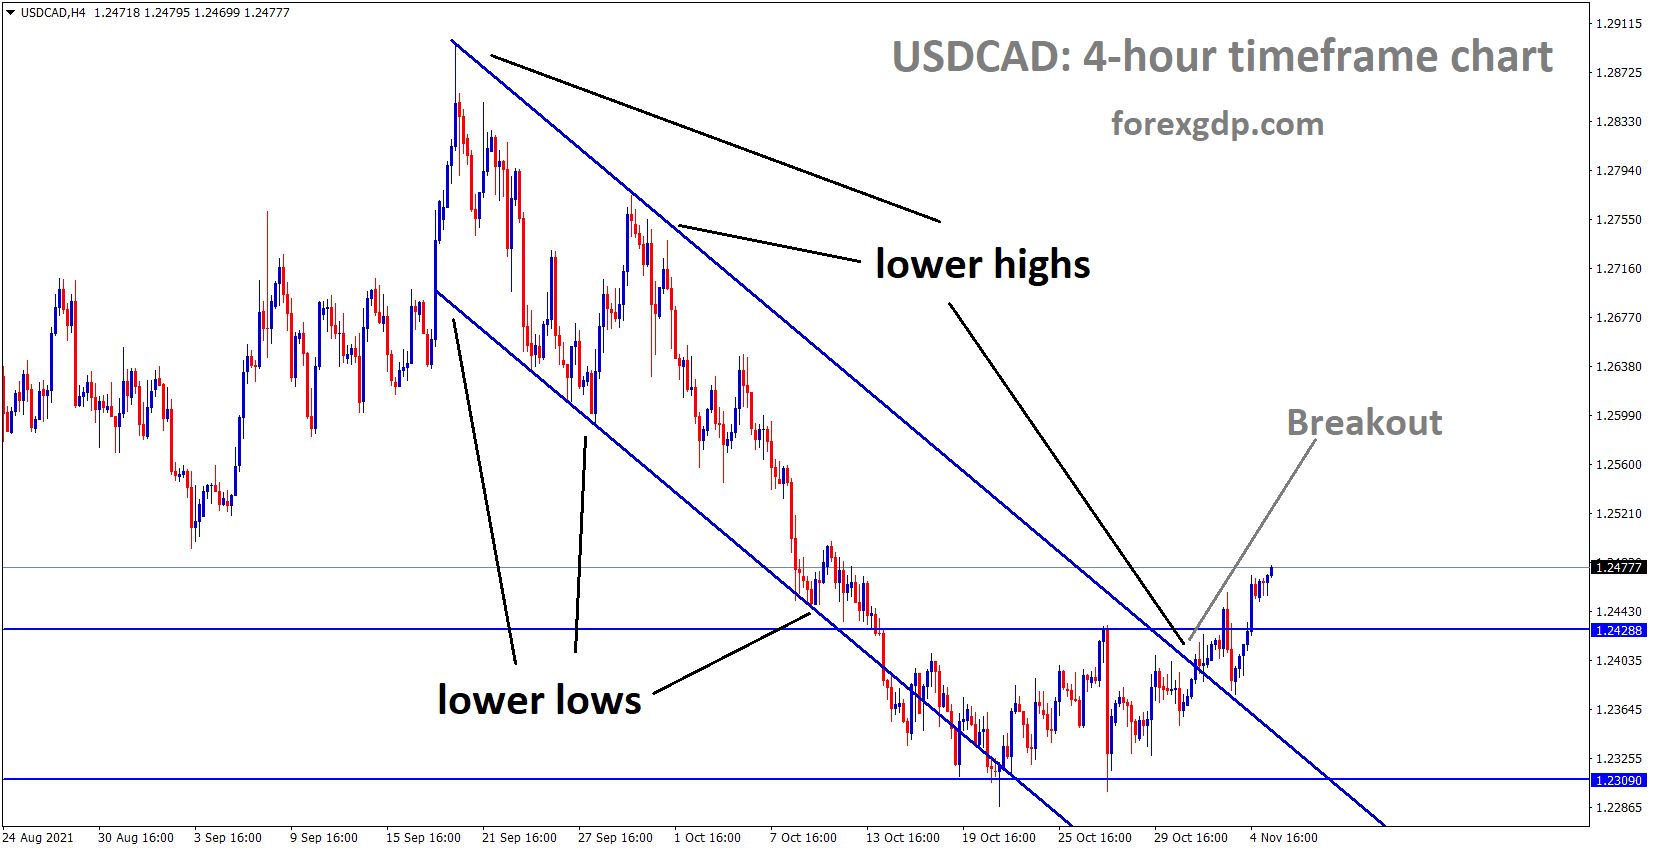 USDCAD has broken the Descending channel and Box pattern within the channel.